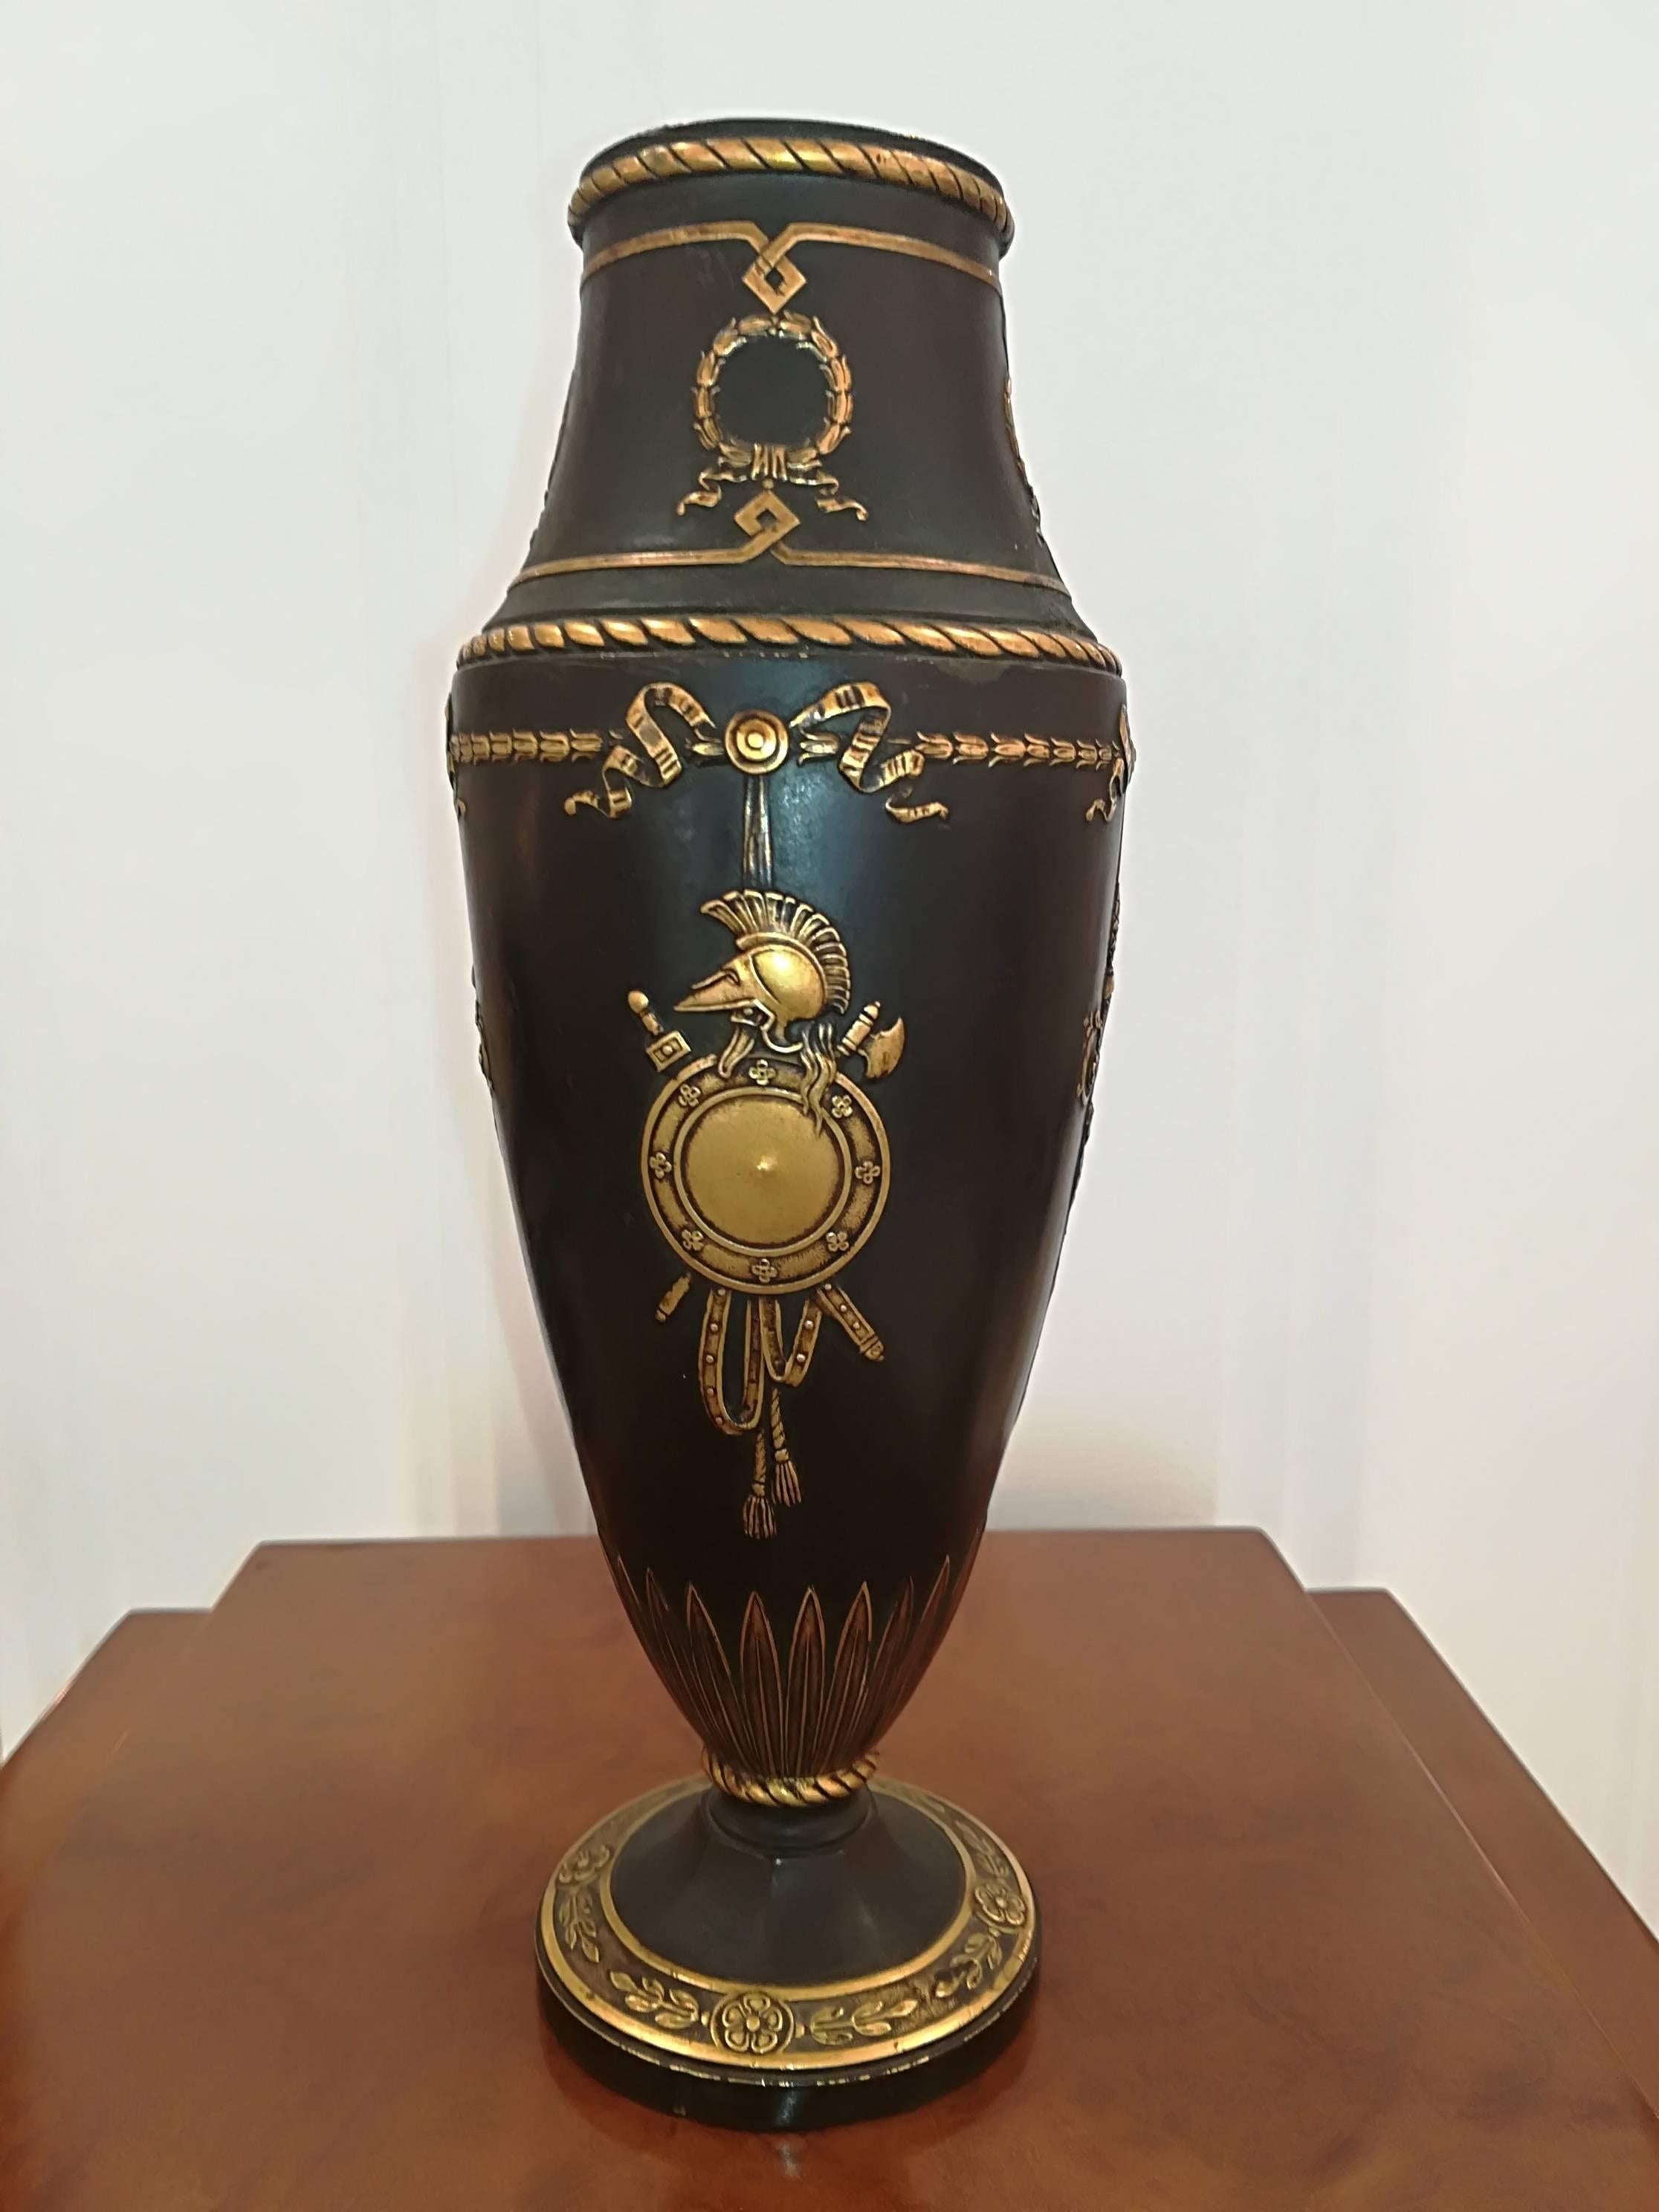  Christofle Neo classical Bronze Vase Circa 1920,  double patina black and gold, signed, in excellent condition